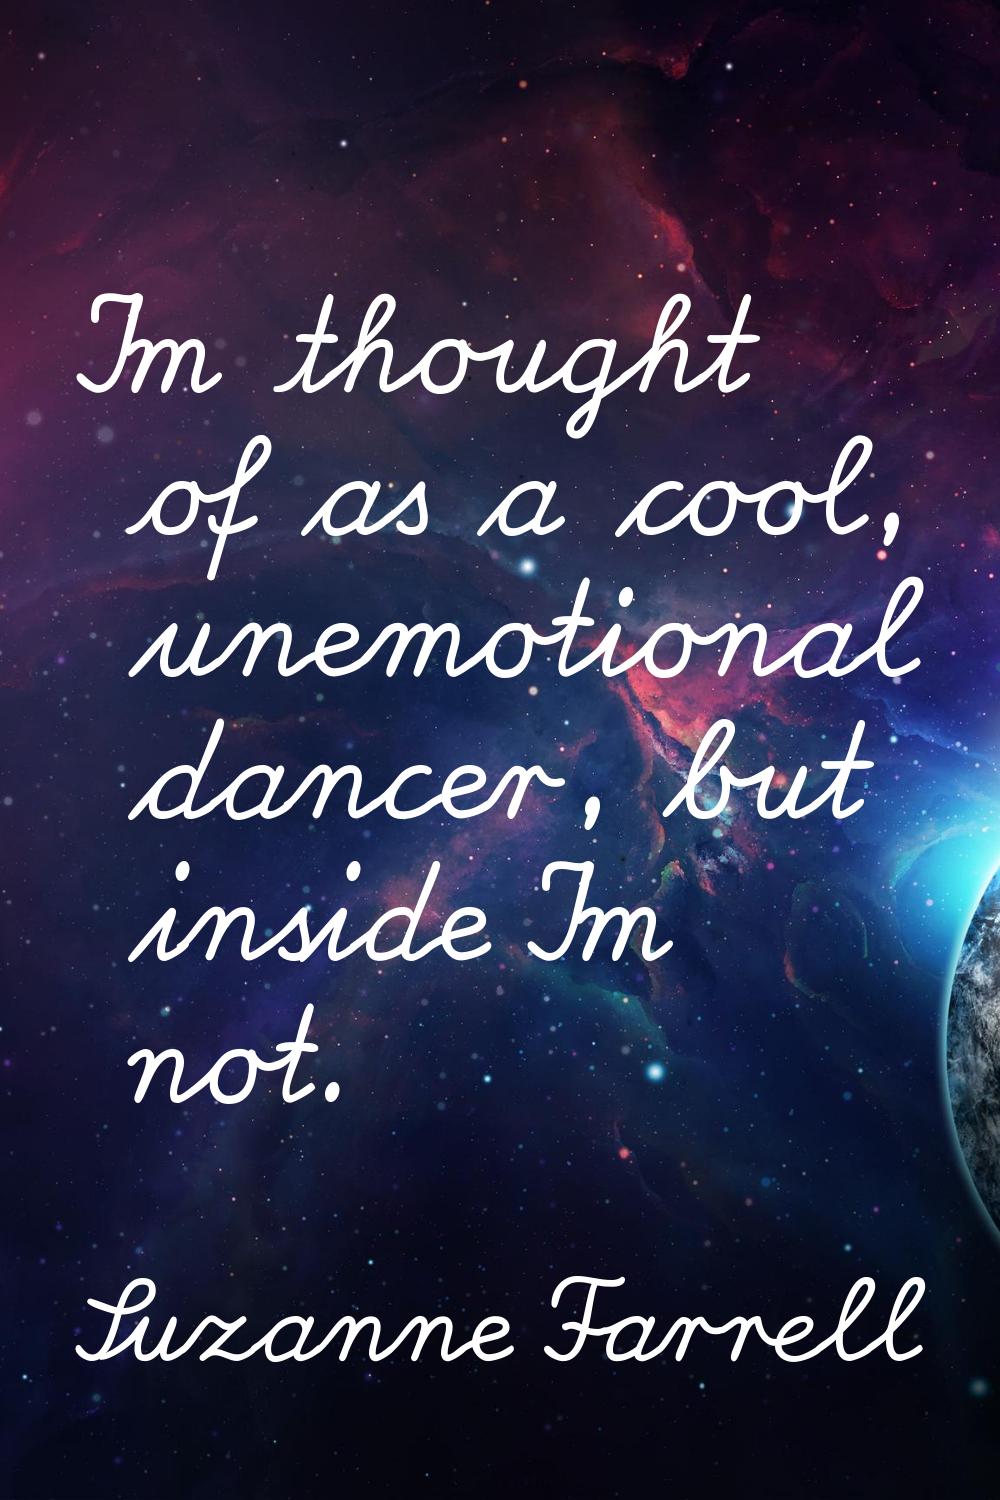 I'm thought of as a cool, unemotional dancer, but inside I'm not.